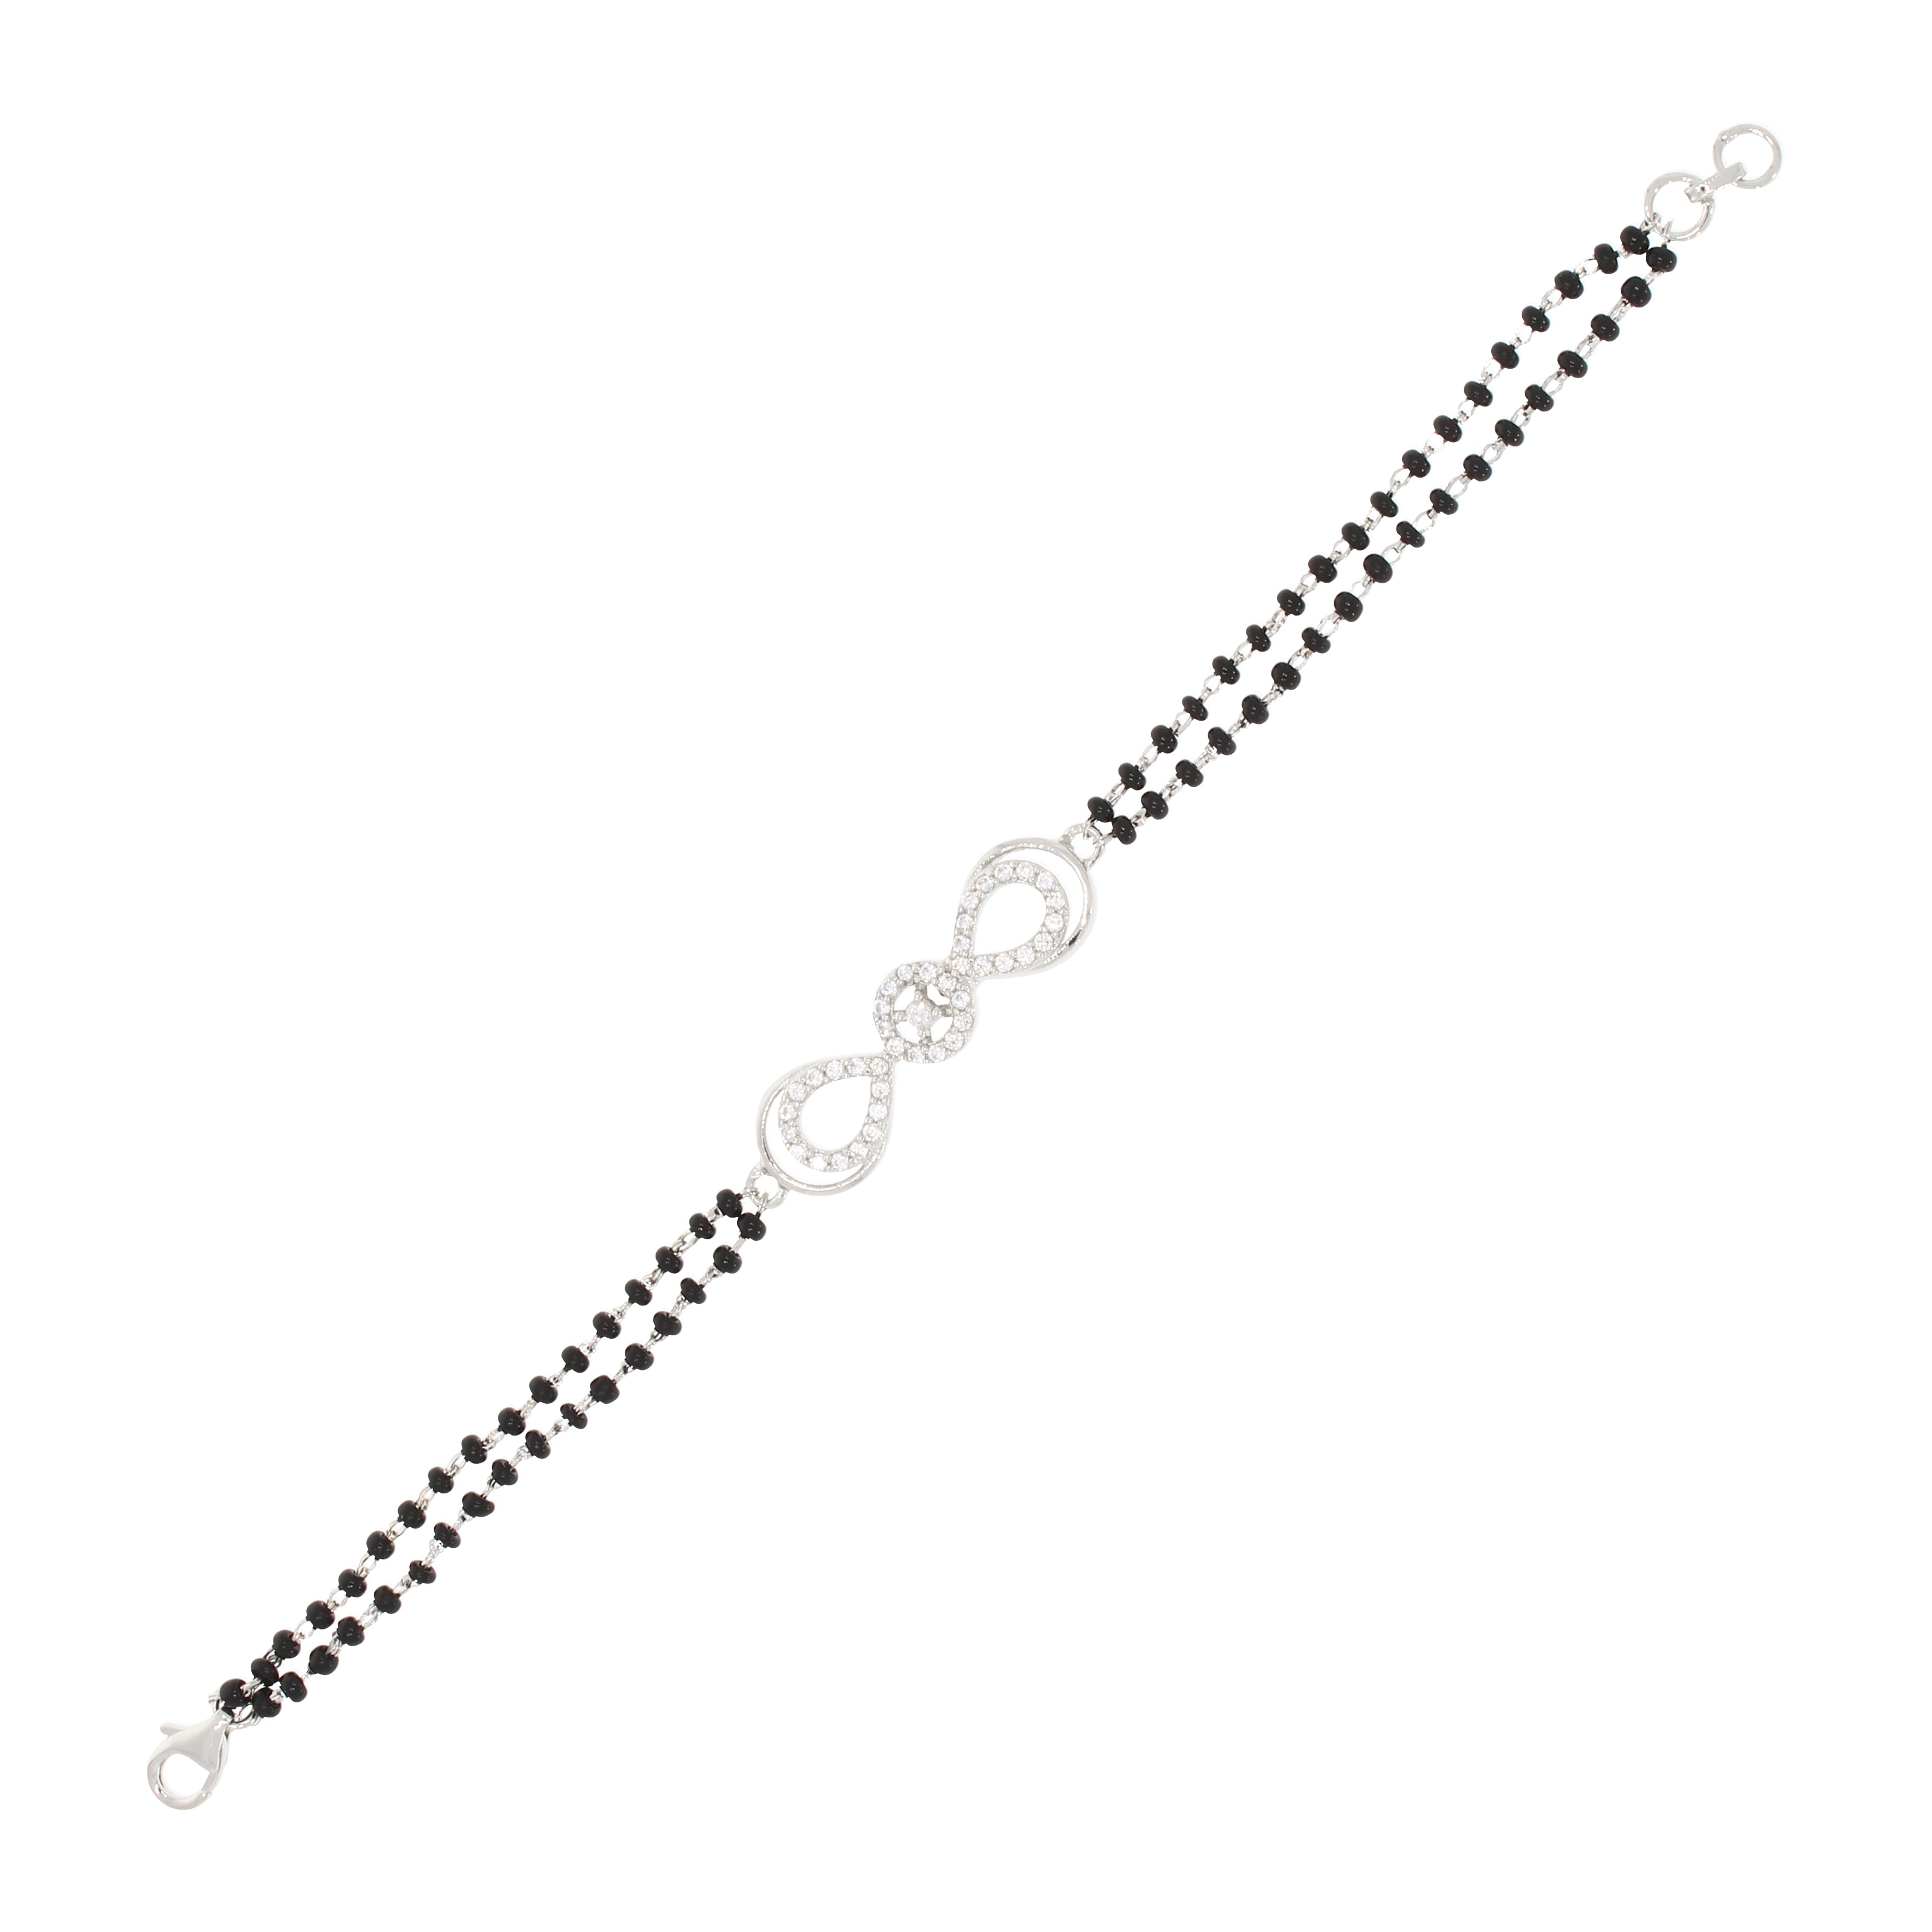 JHB Gold plated Brass Beads Hand Mangalsutra Bracelet for Women :  Amazon.in: Fashion